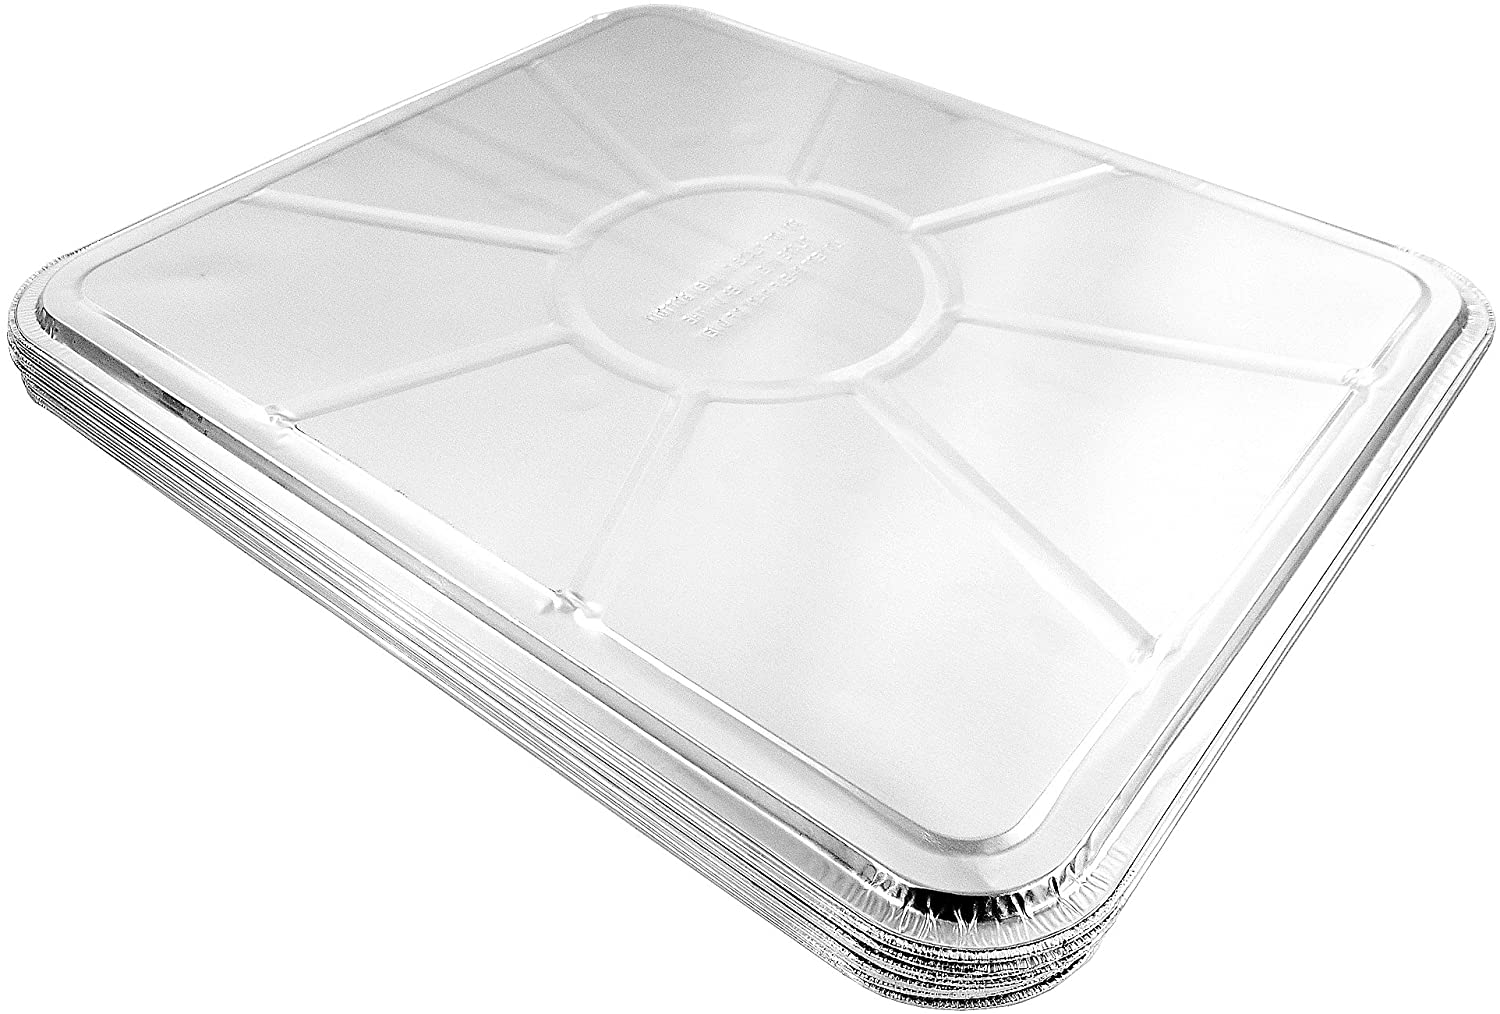  PLASTICPRO Disposable Foil oven liner Reusable Oven